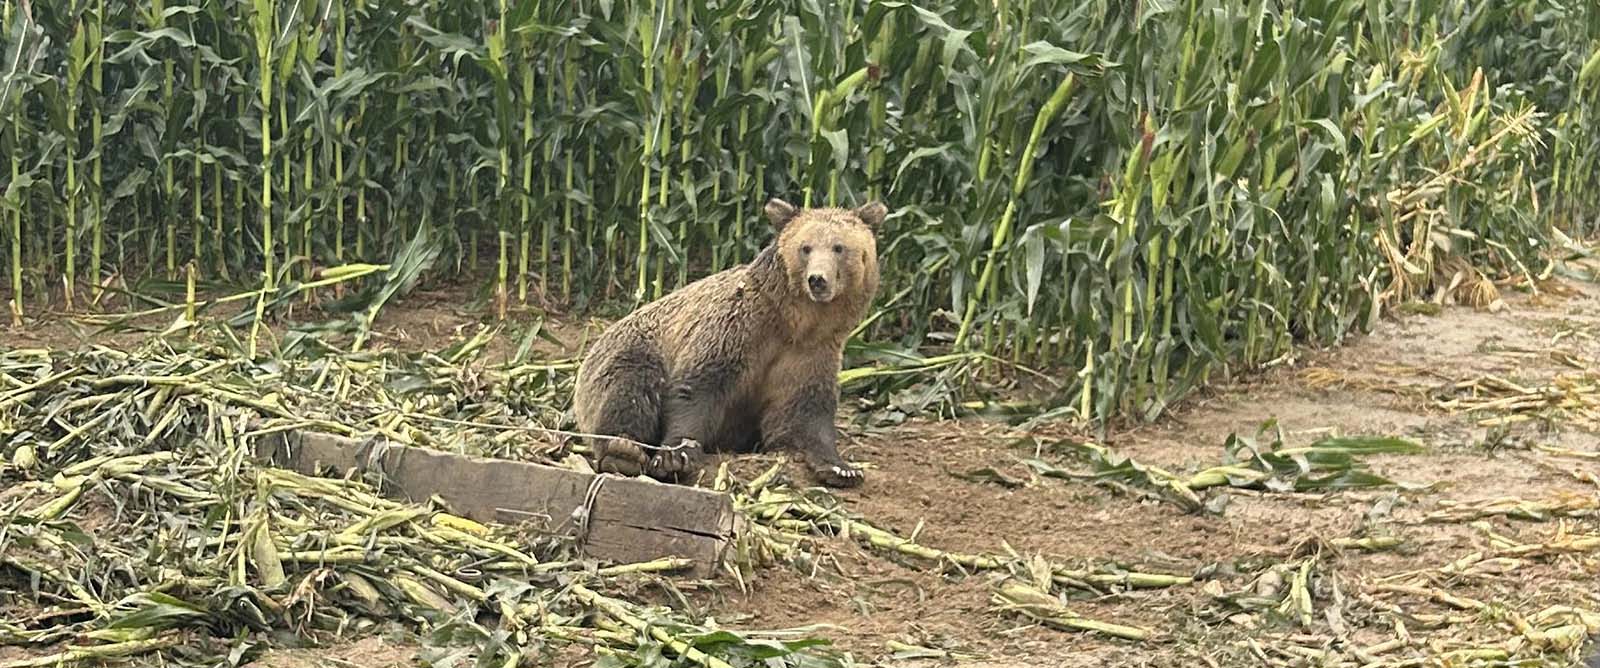 Grizzly bear sits at edge of corn field.